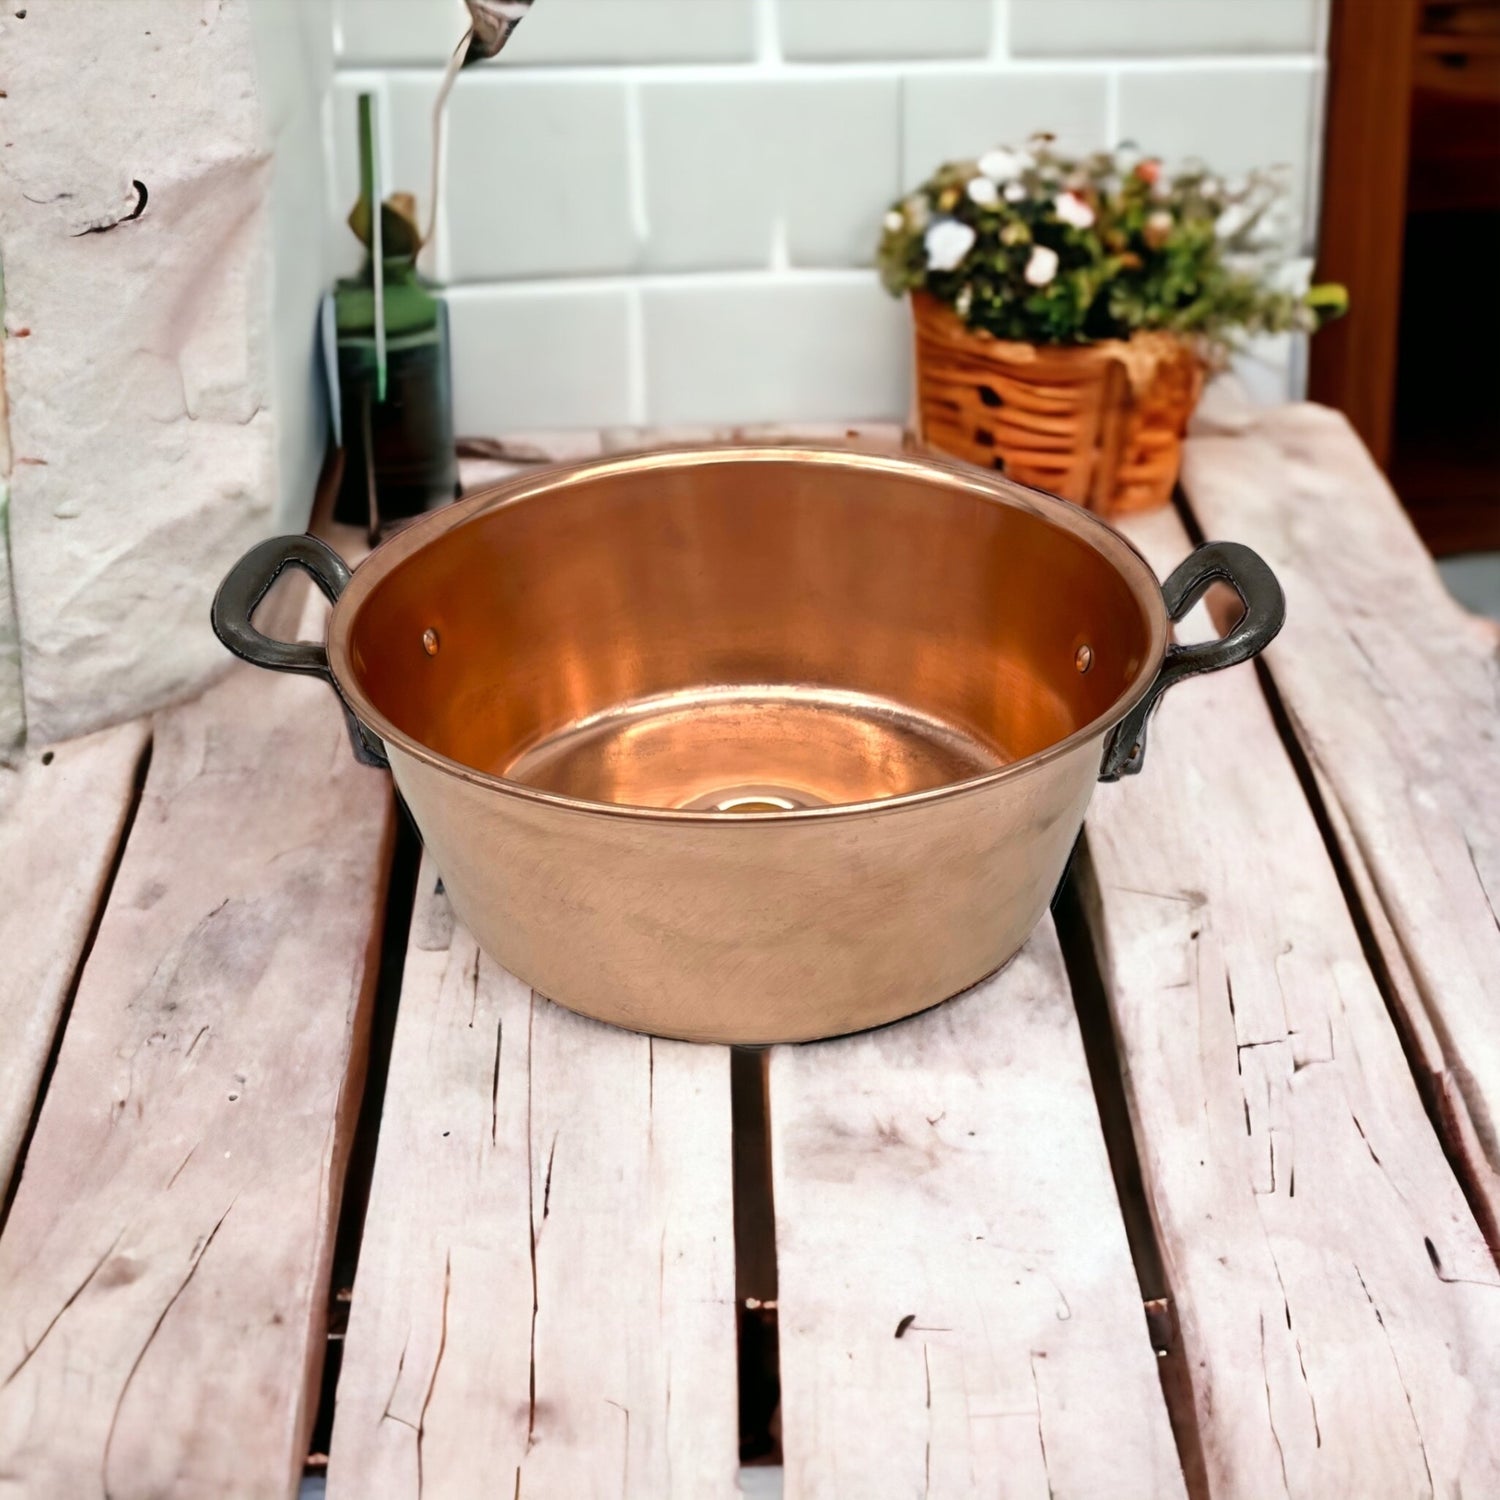 Copper Basins and Sinks